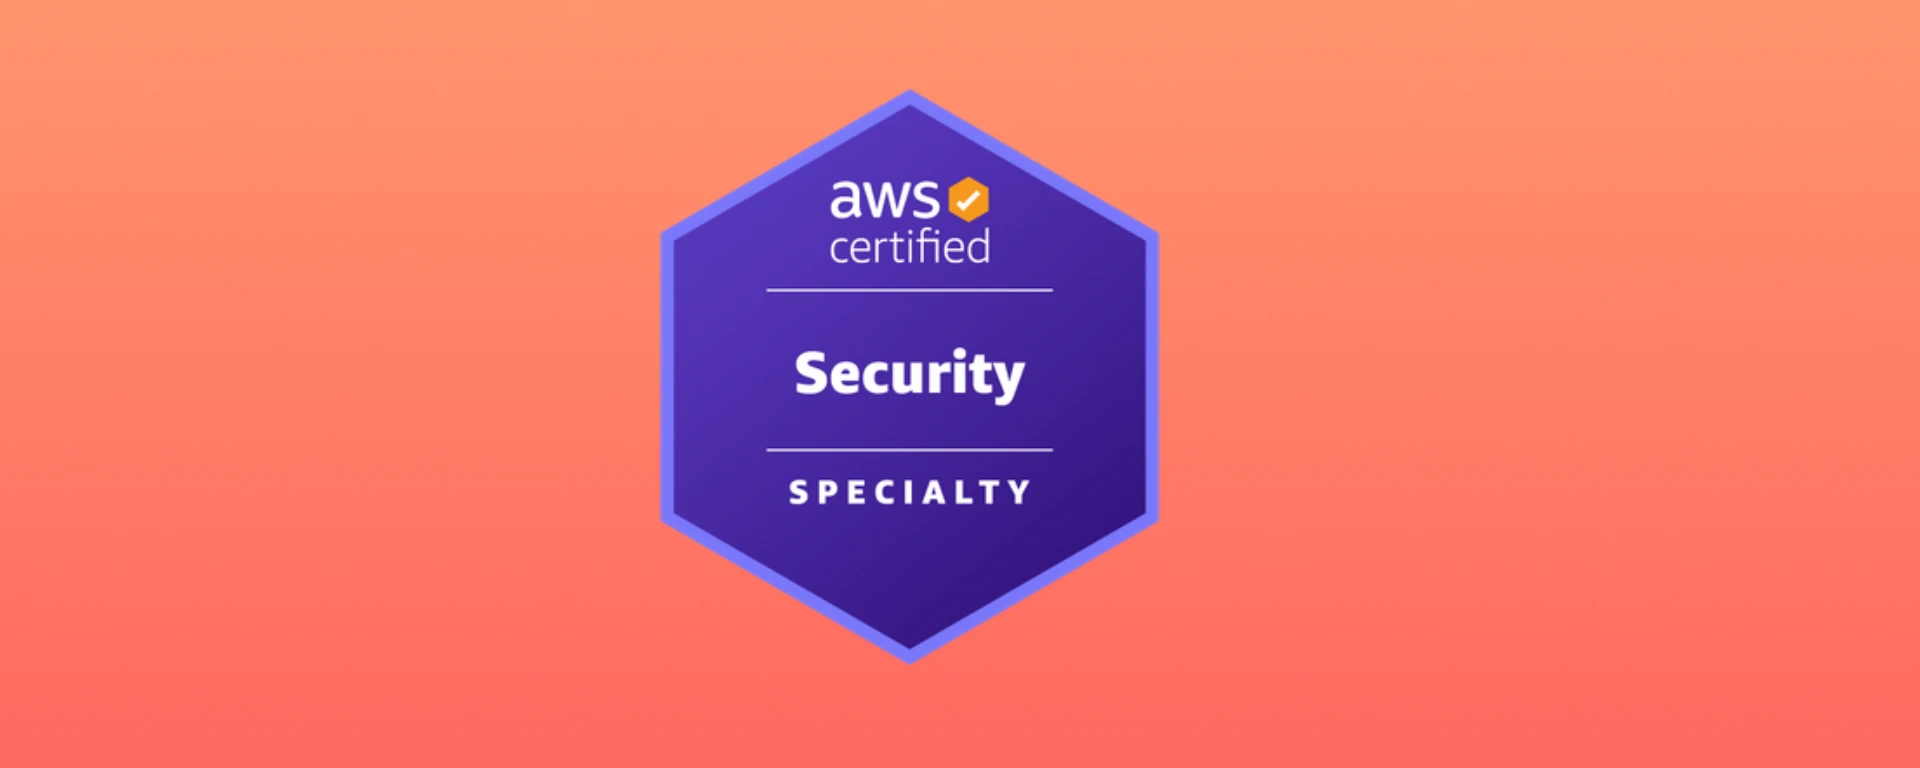 Free exam guide: AWS Certified Security Specialty